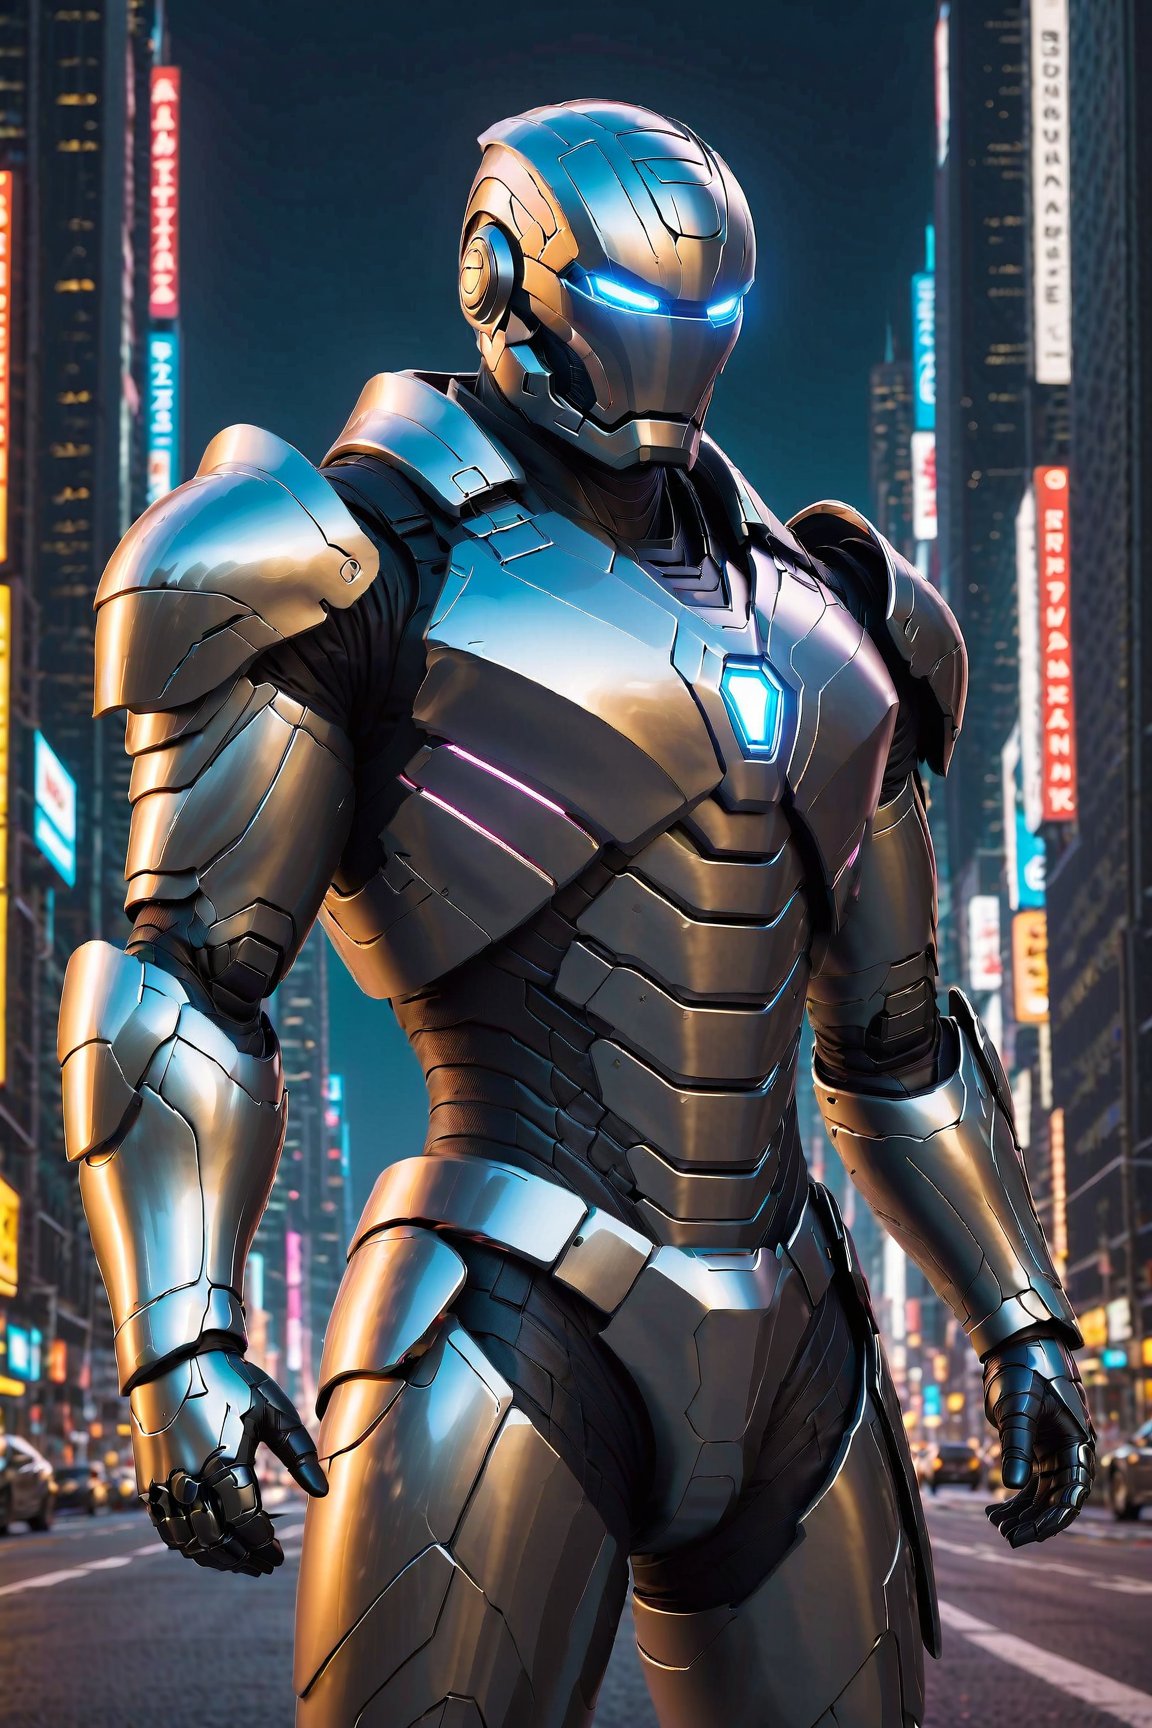 "A powerful Iron Man suit, adorned with glowing repulsors and advanced weaponry, standing tall and proud against a backdrop of city lights."